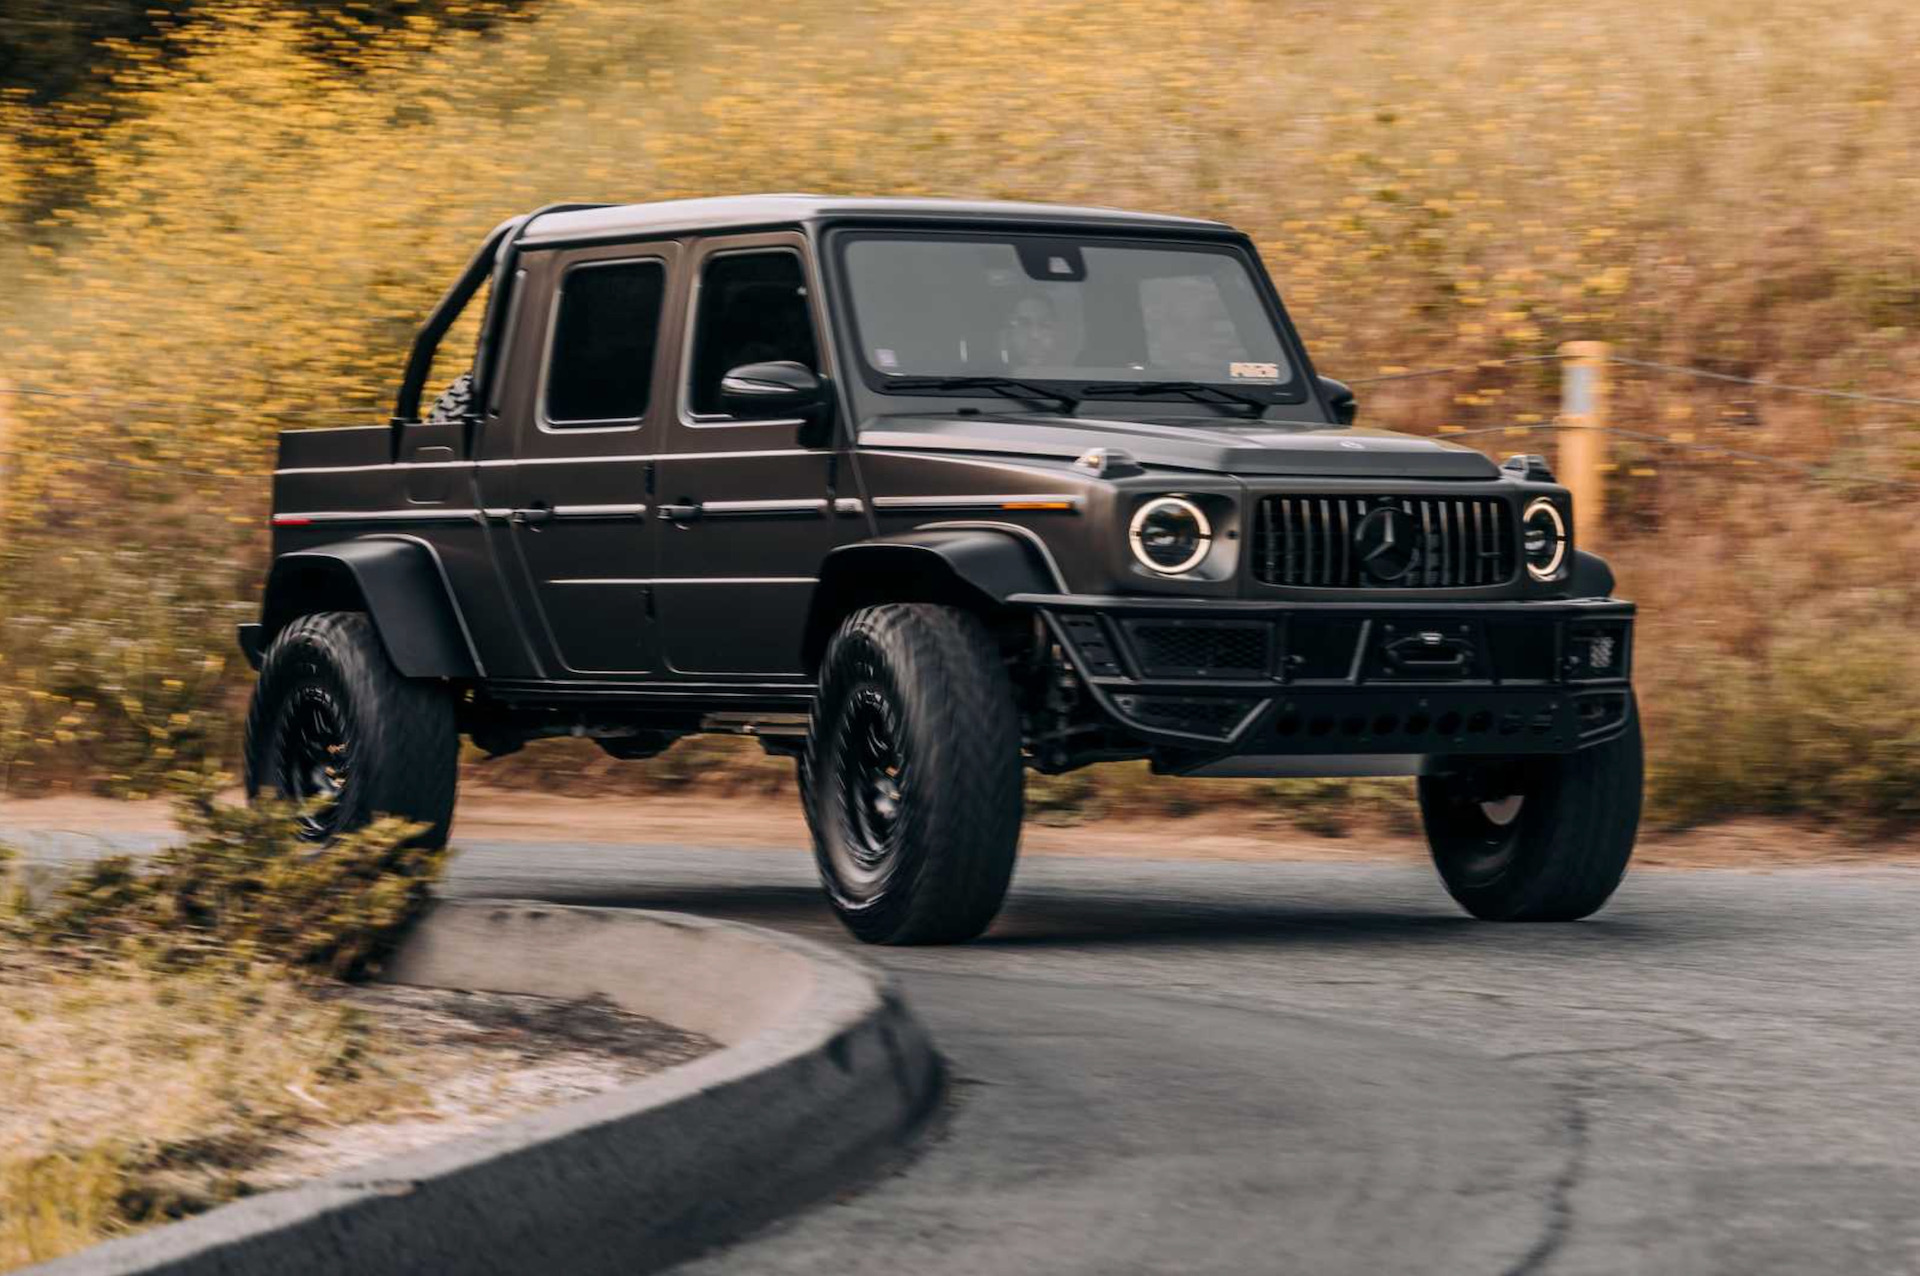 Meet the Pit26 Mercedes-AMG G 63 pickup truck conversion